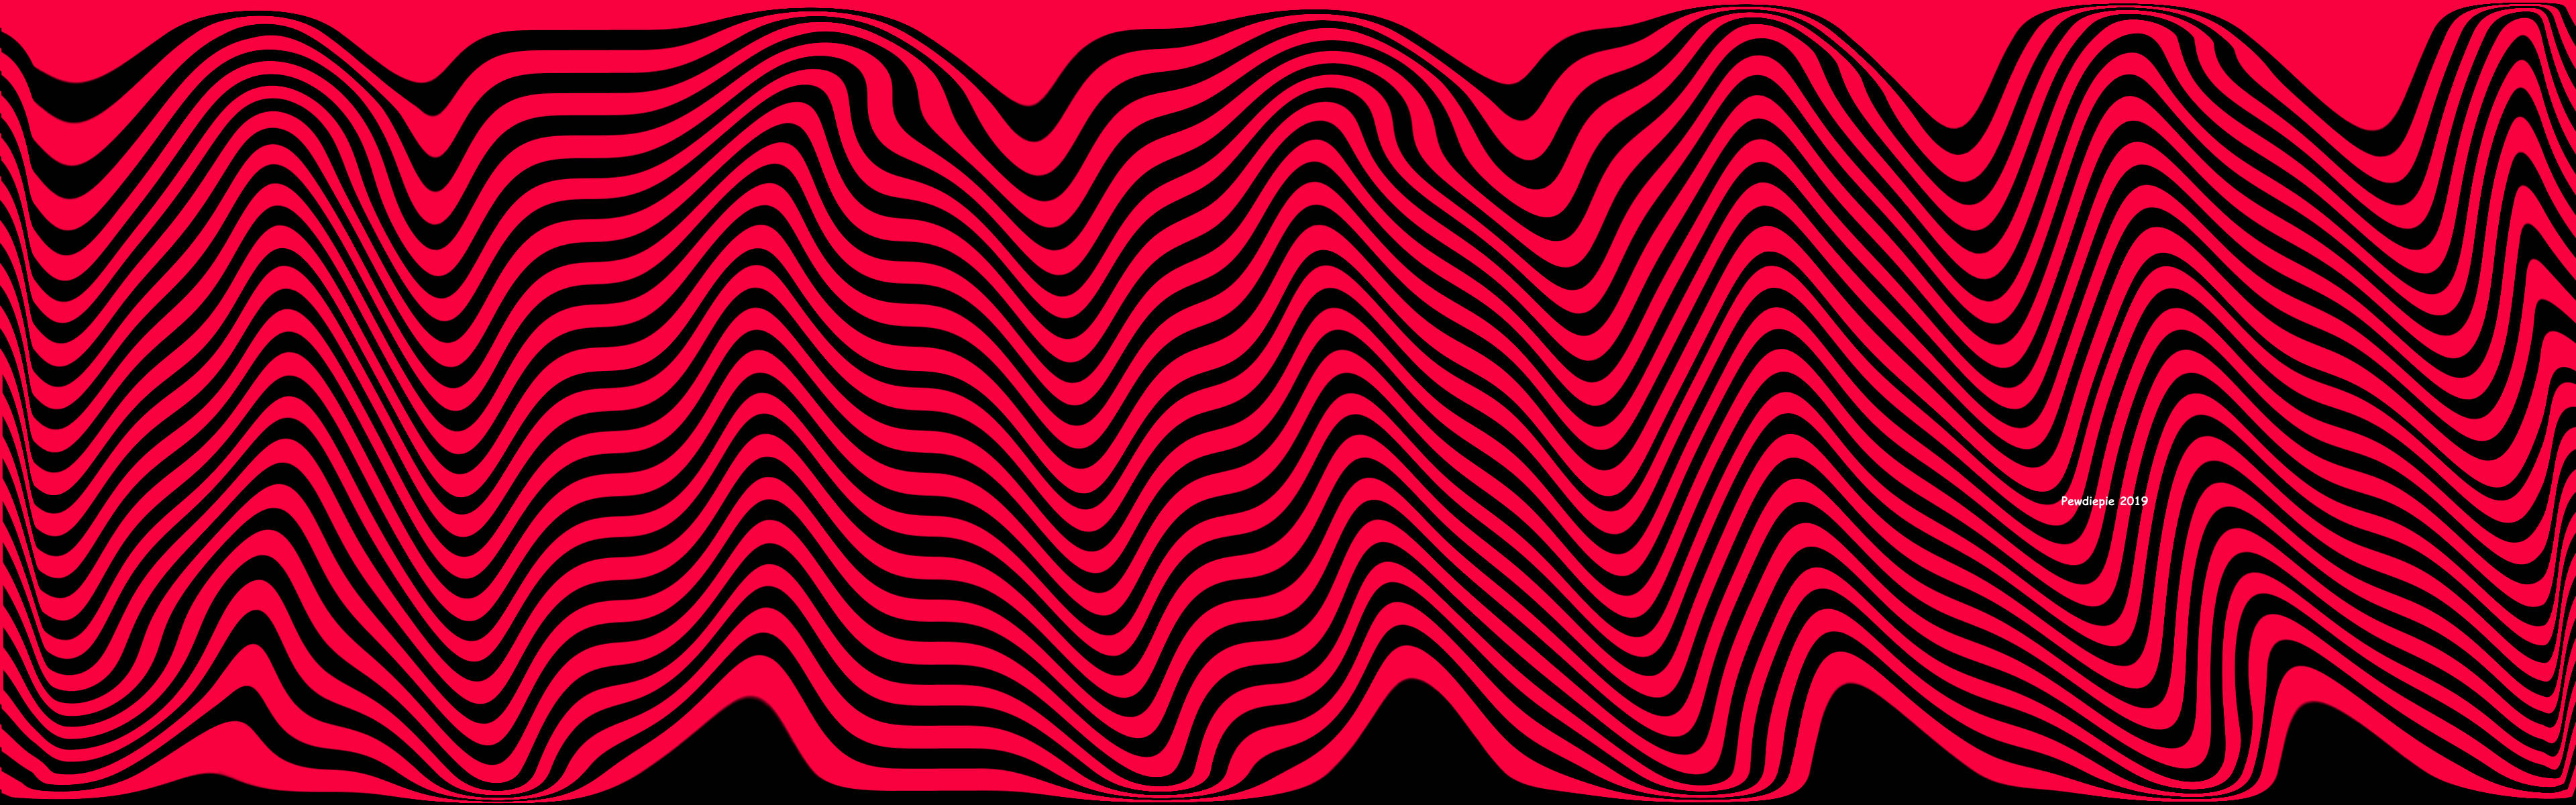 Pewdiepie's unique style on an eye-catching pink background Wallpaper